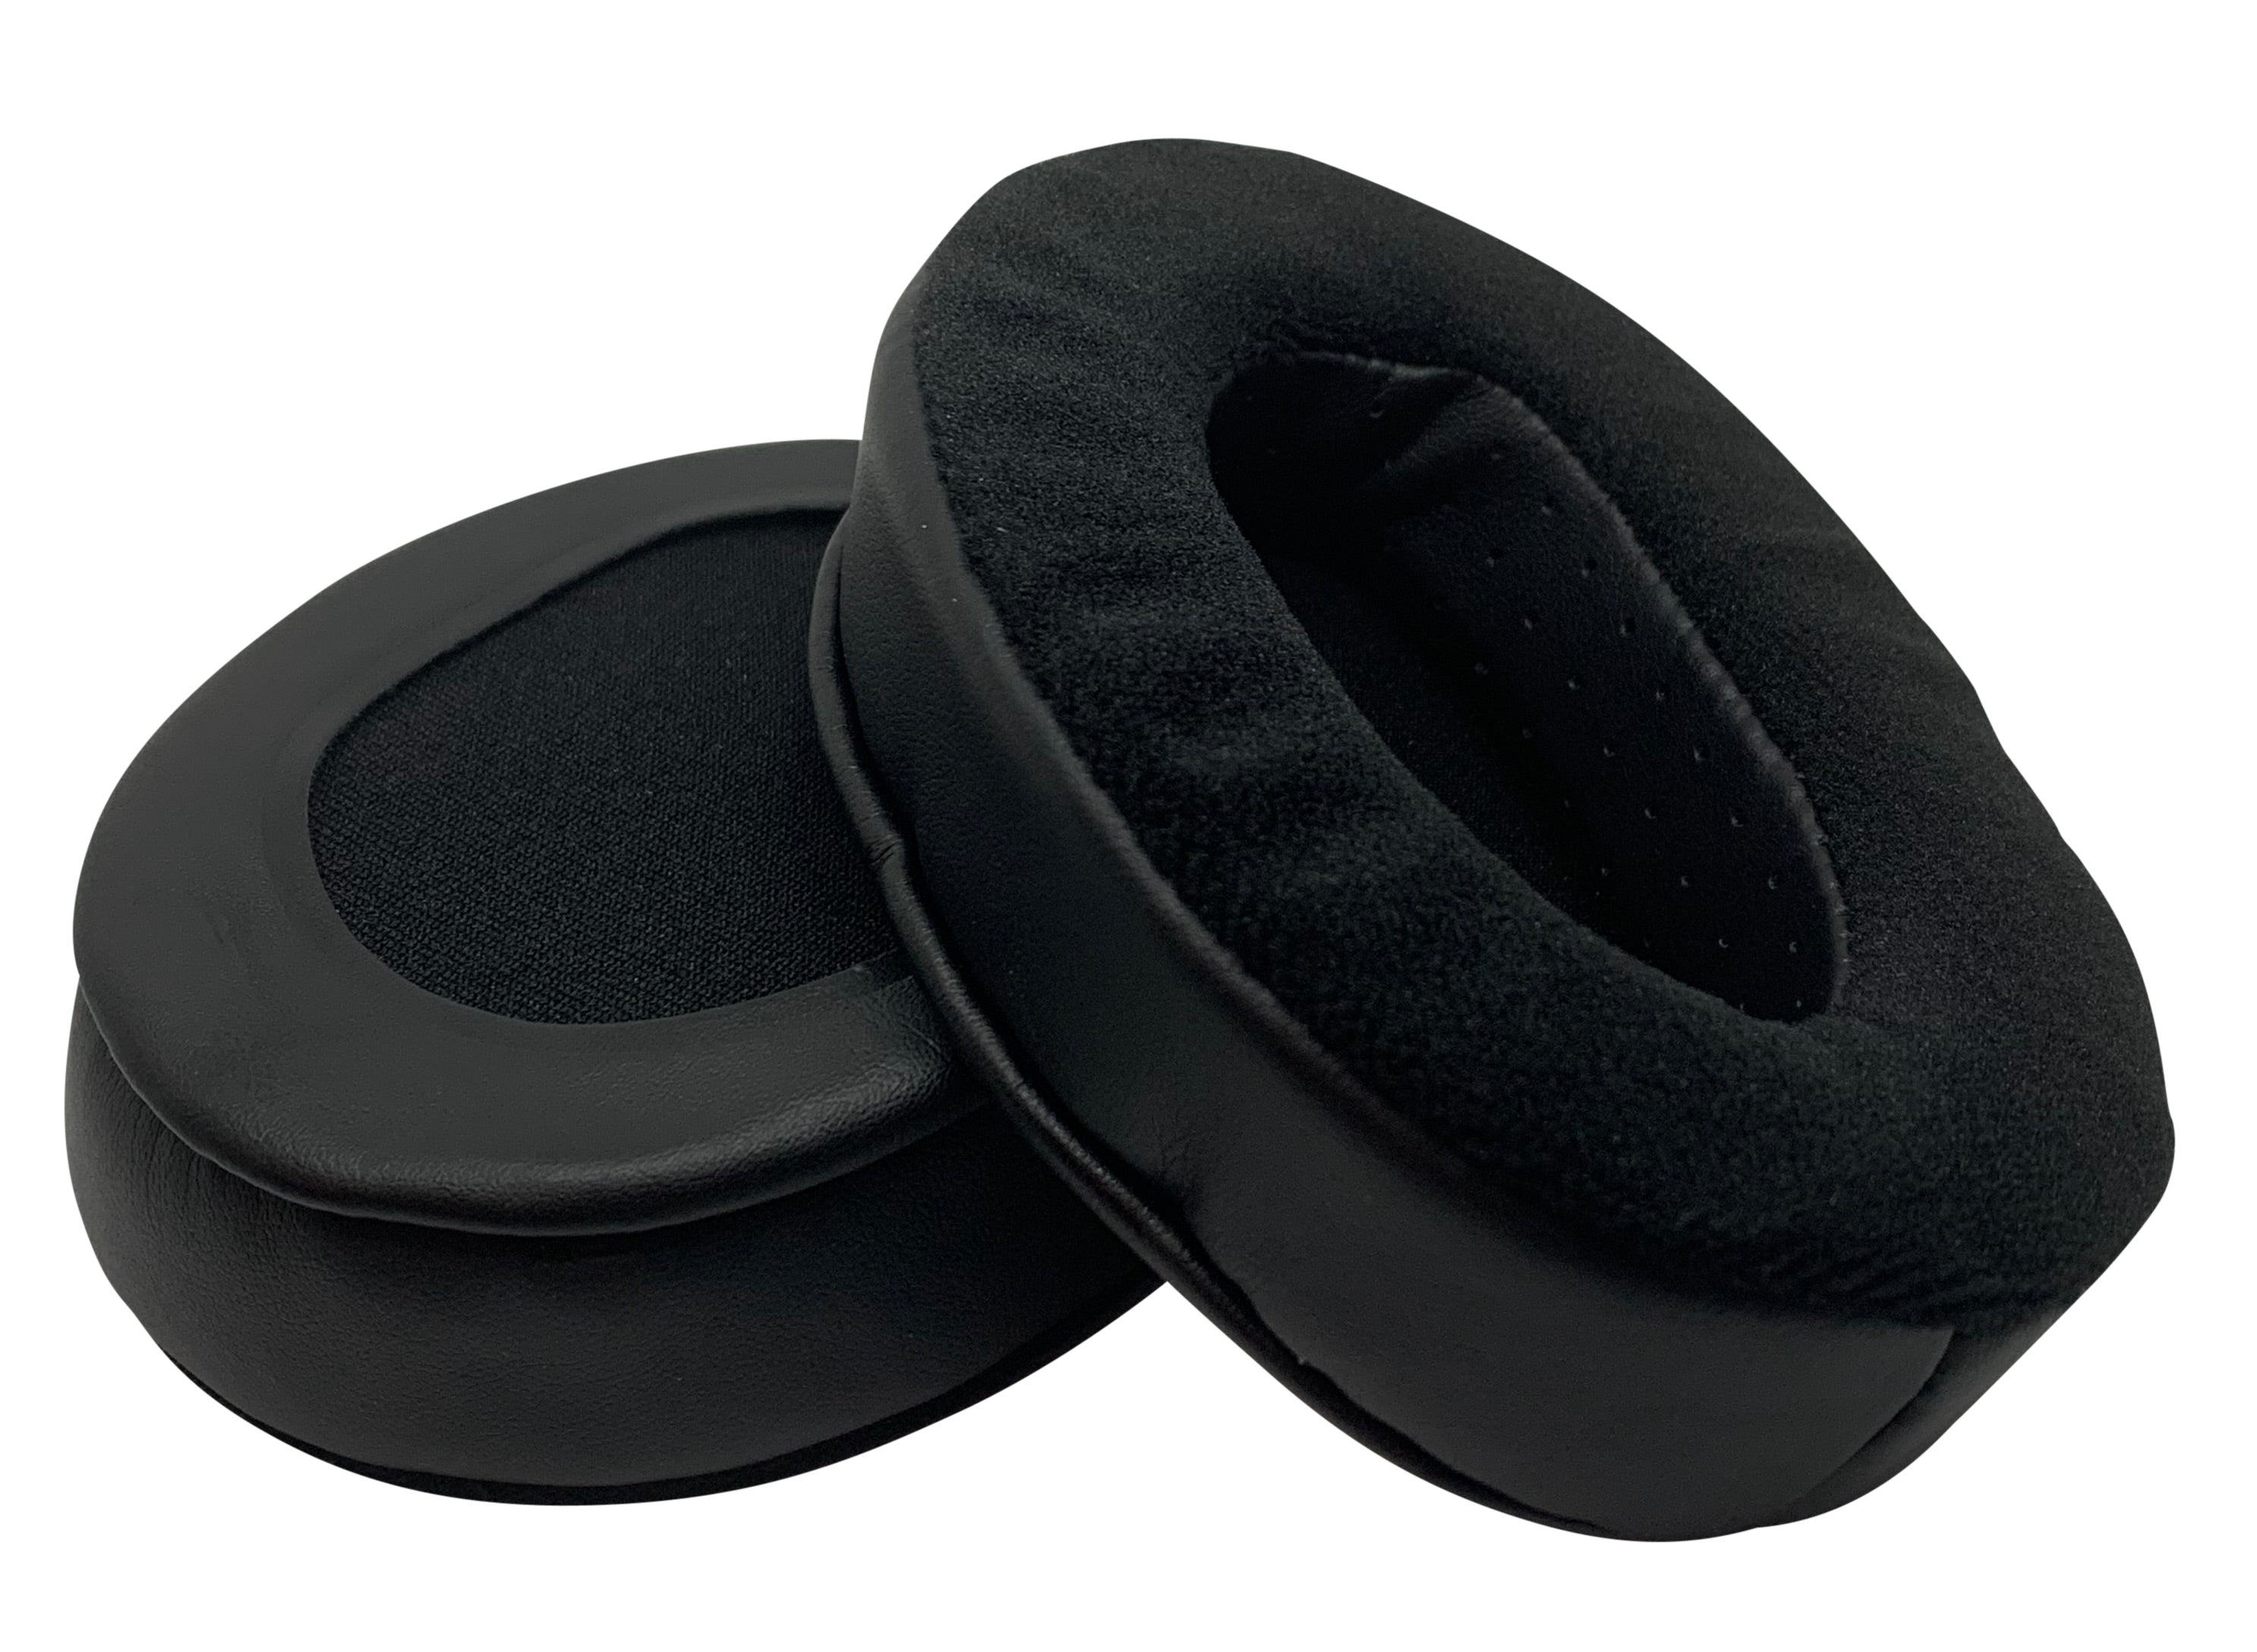 CentralSound Premium XL Oval Replacement Ear Pads for Razer Gaming Headsets - CentralSound